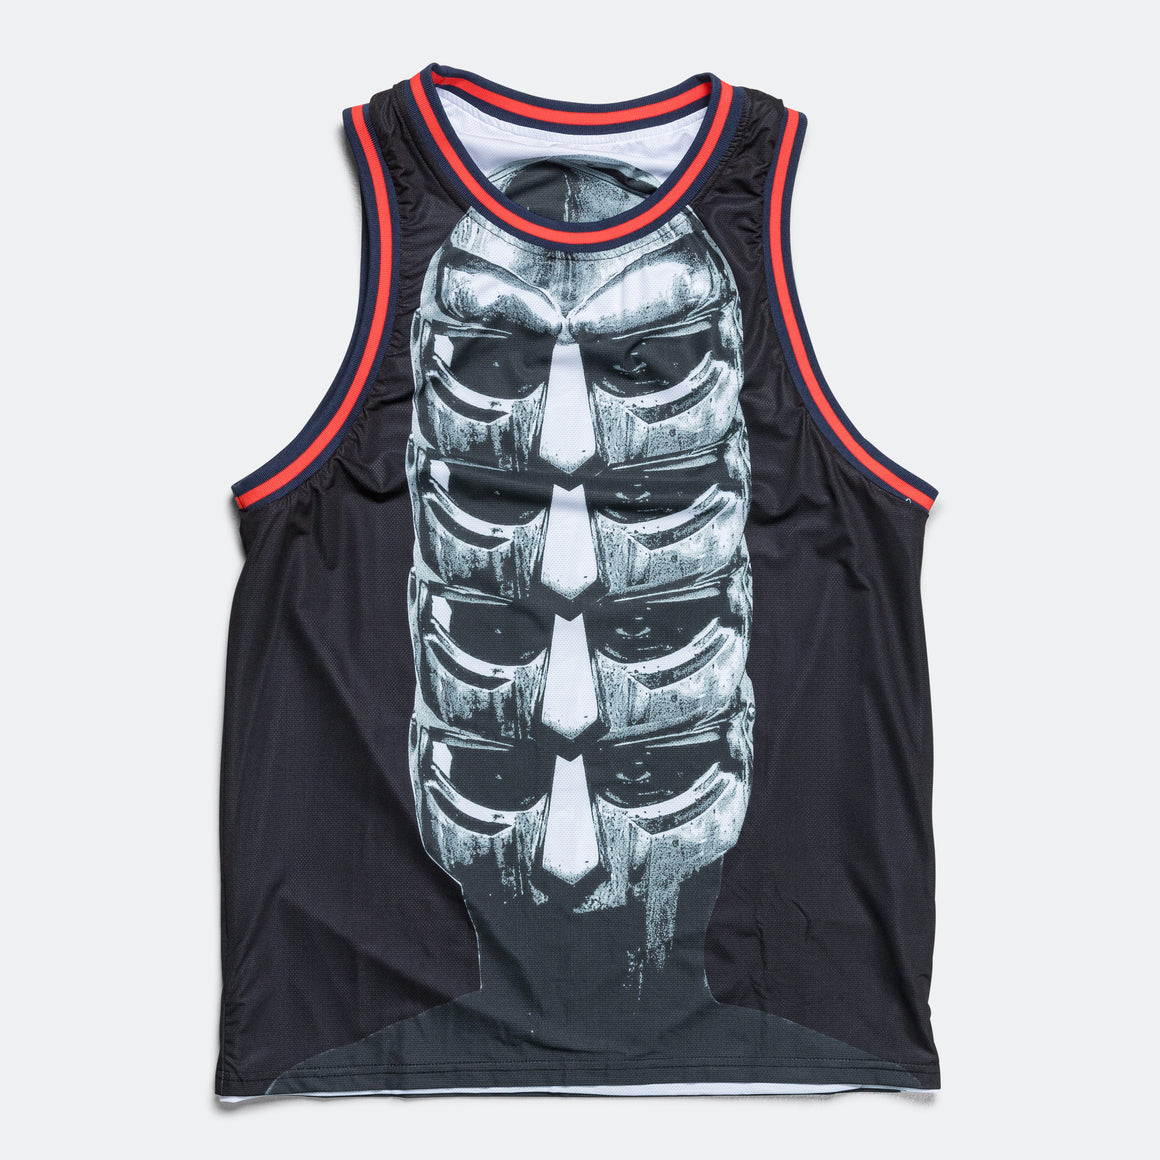 For The Homies - DOOM Mesh Singlet - White/Black Reversible - UP THERE